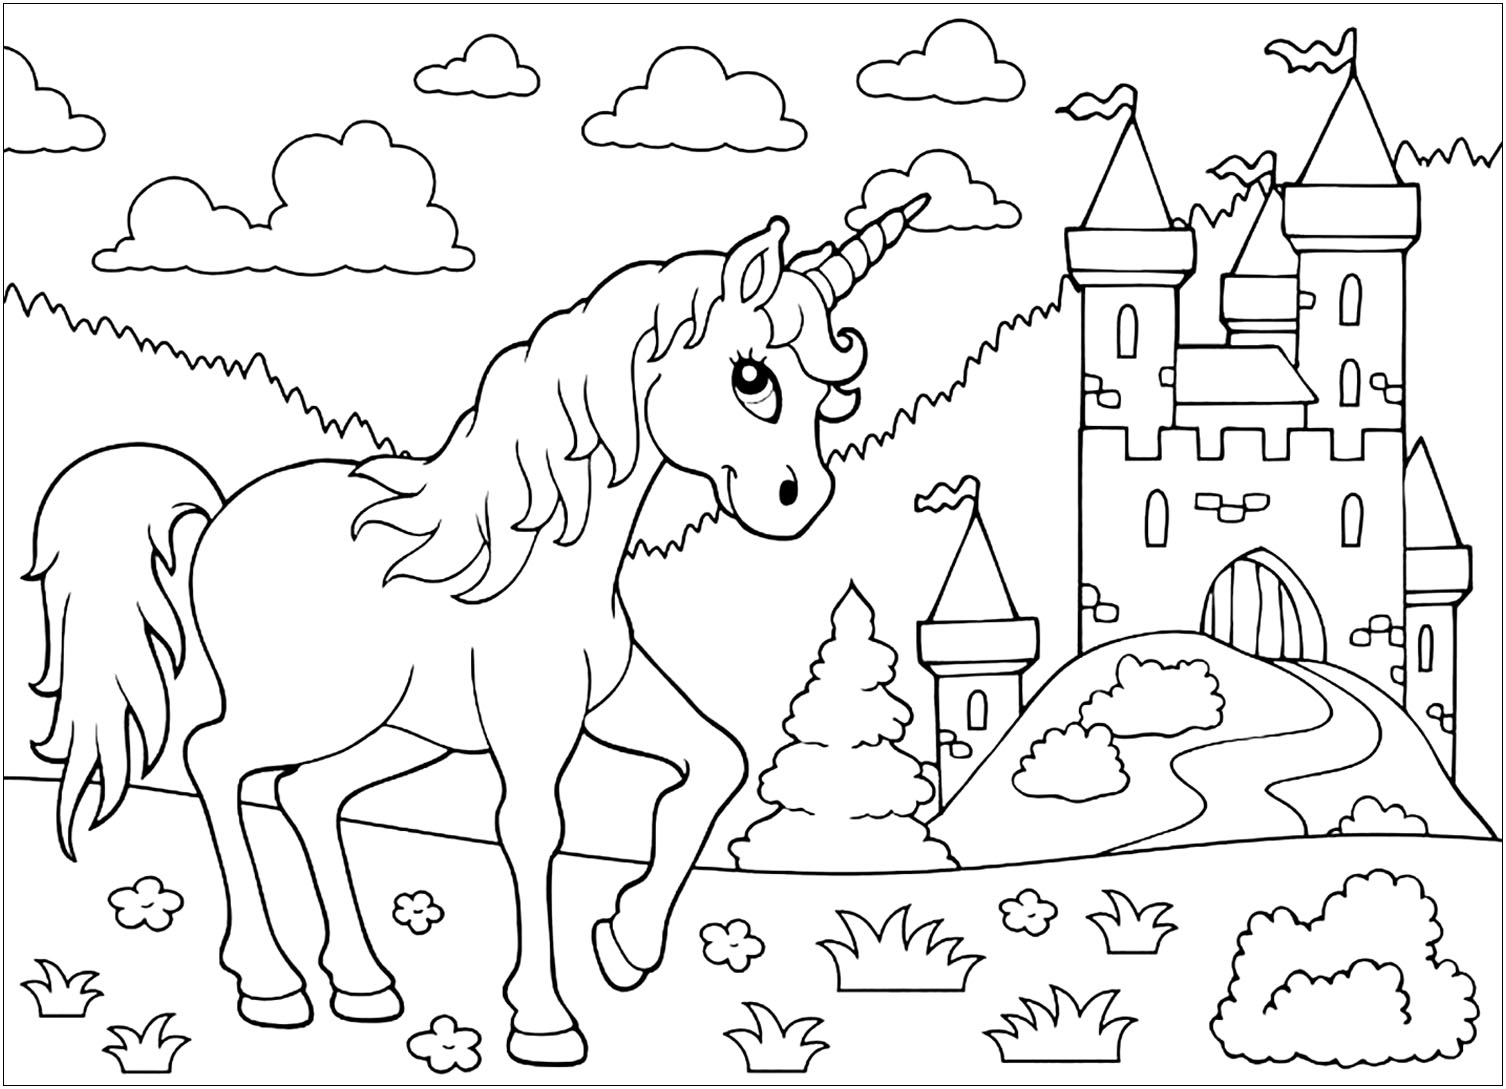 Unicorn coloring pages for kids - Unicorns Kids Coloring Pages